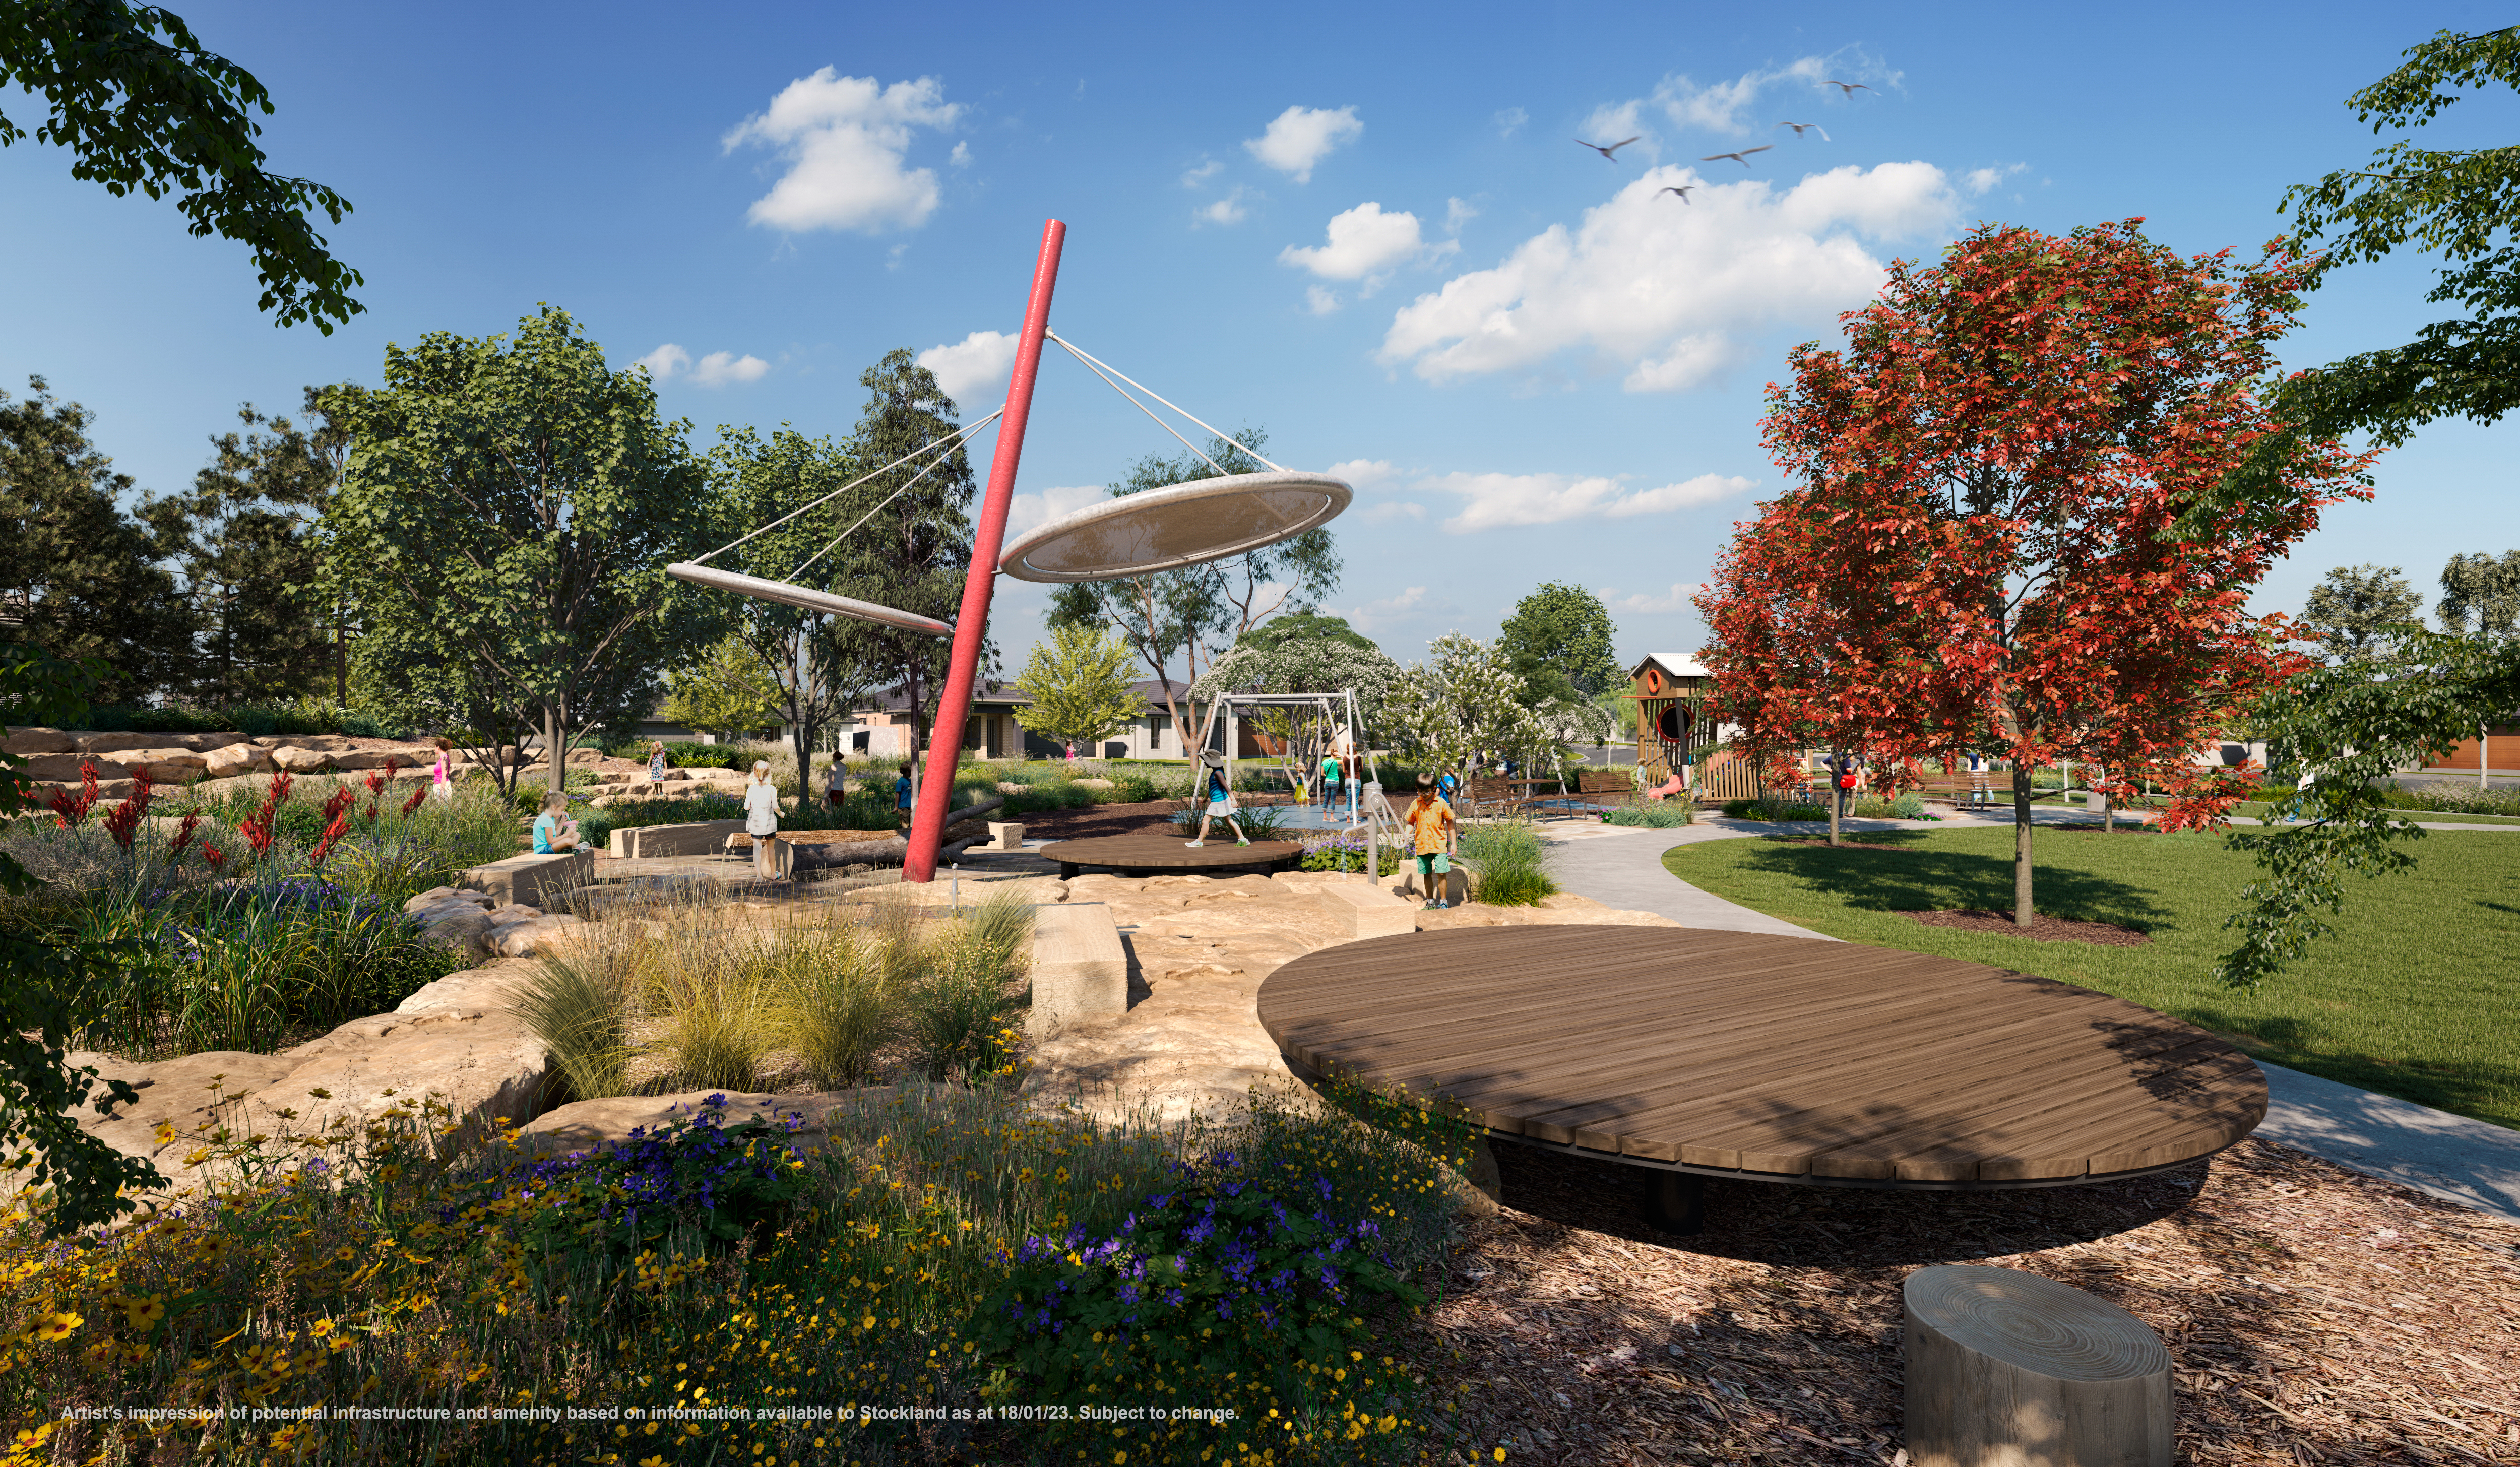 Stage 44 Park render showing landscaping and play equipment